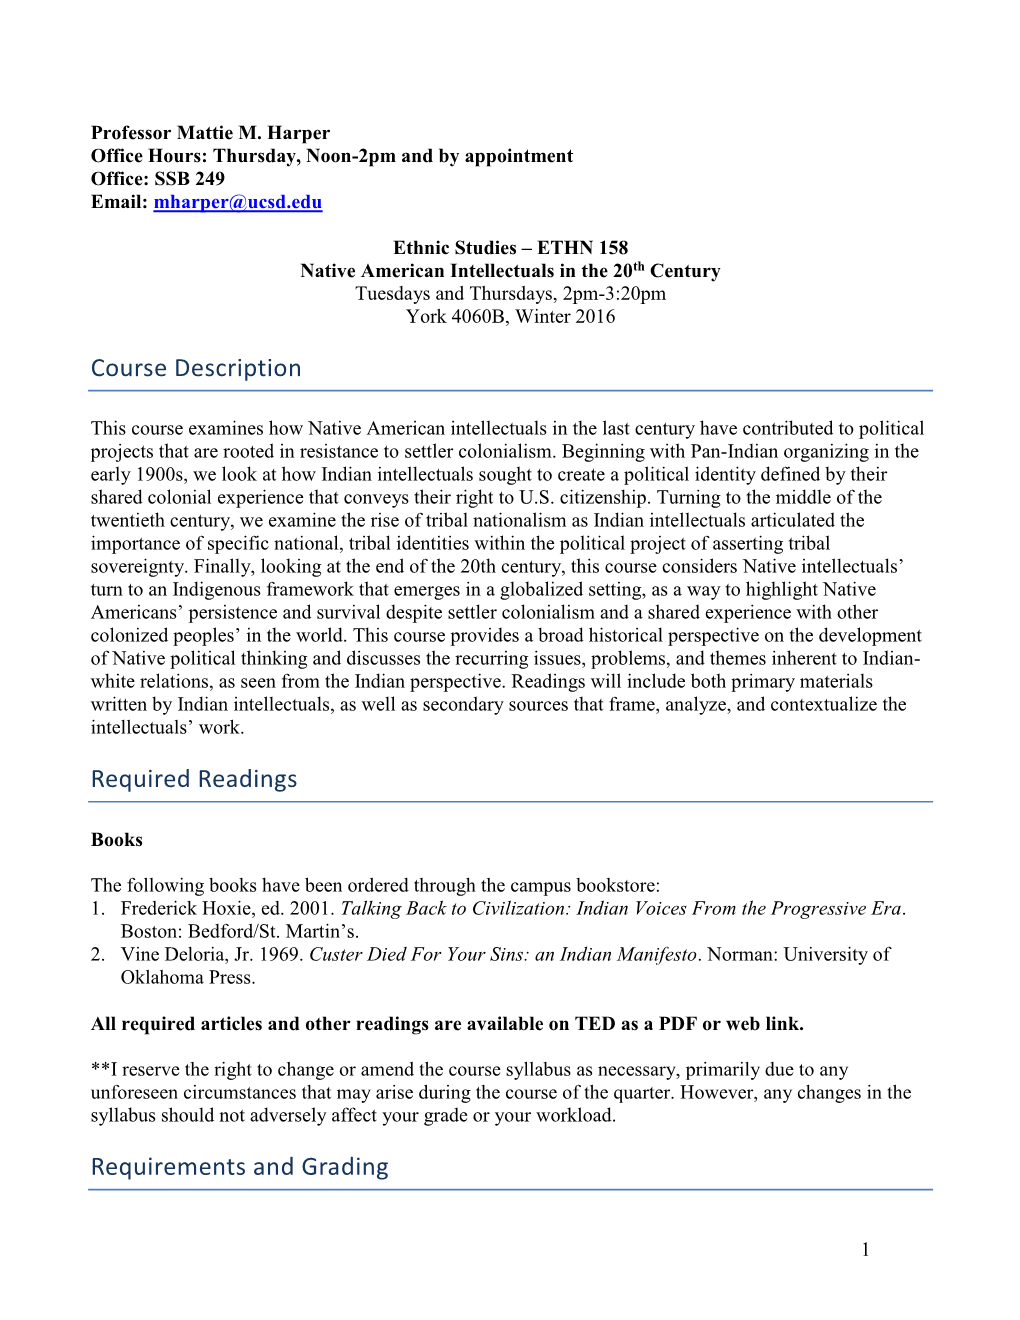 Course Description Required Readings Requirements and Grading